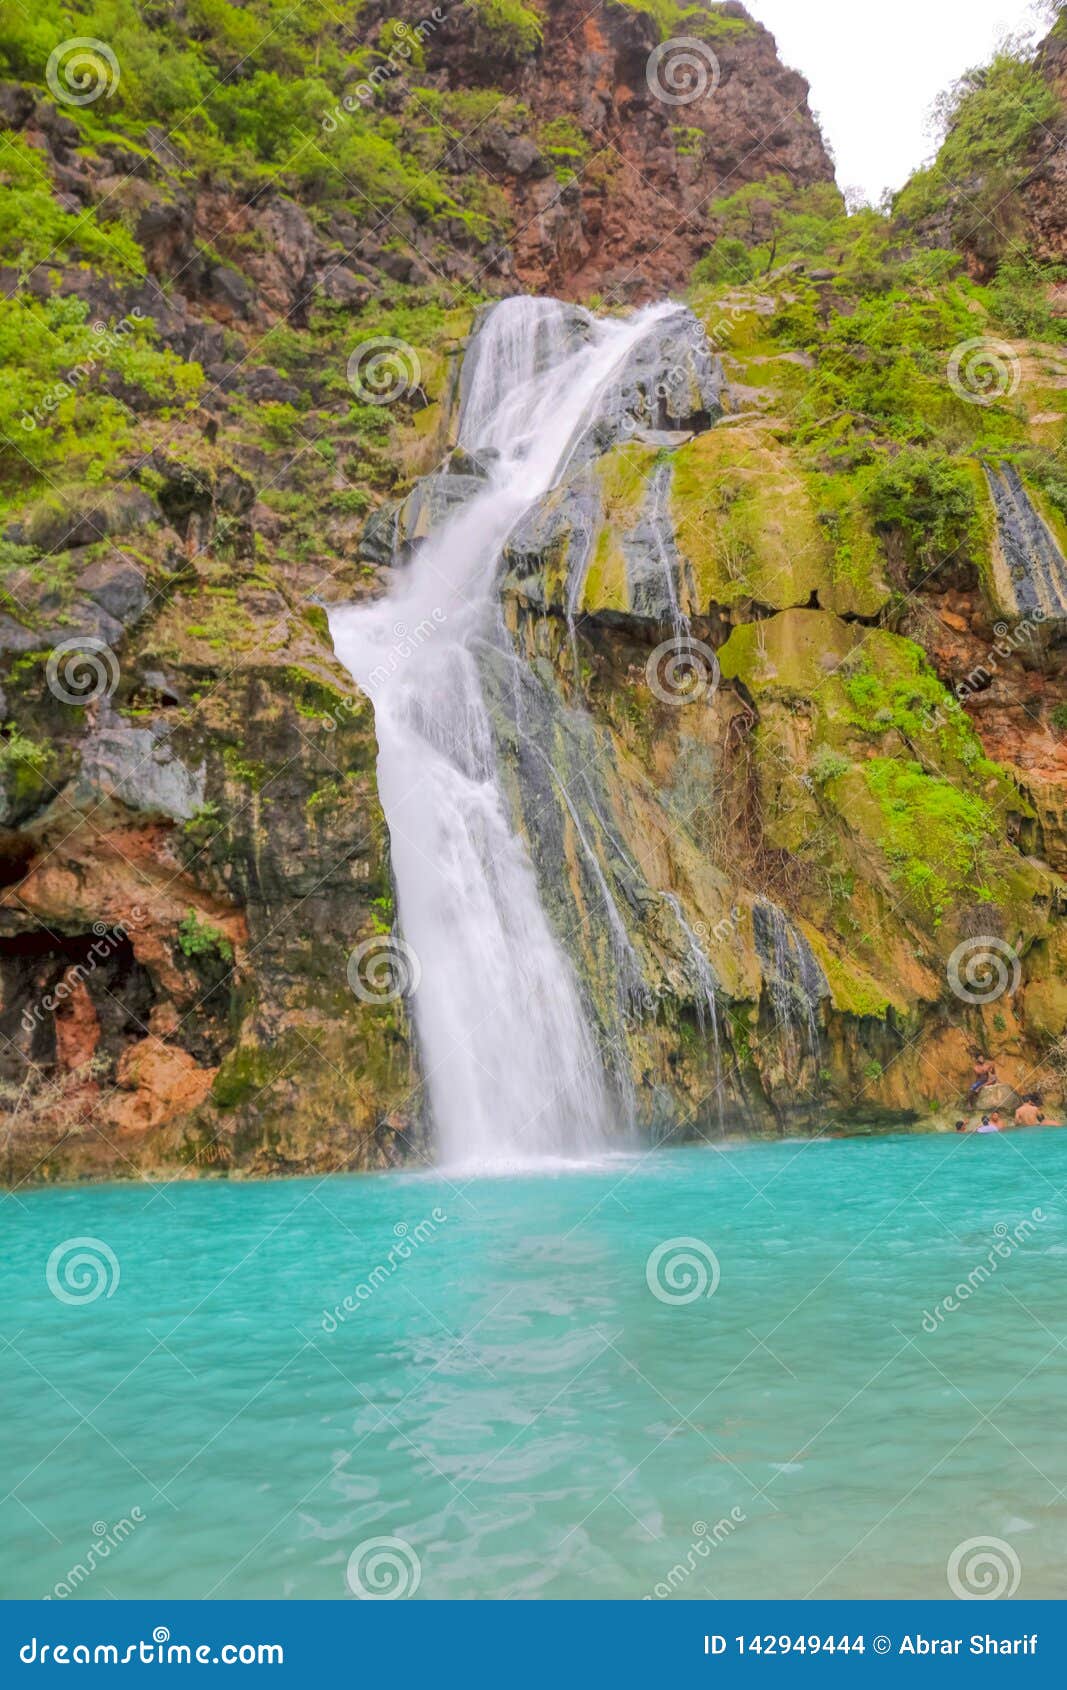 waterfall in ayn khor and lush green landscape, trees and foggy mountains at tourist resort, salalah, oman